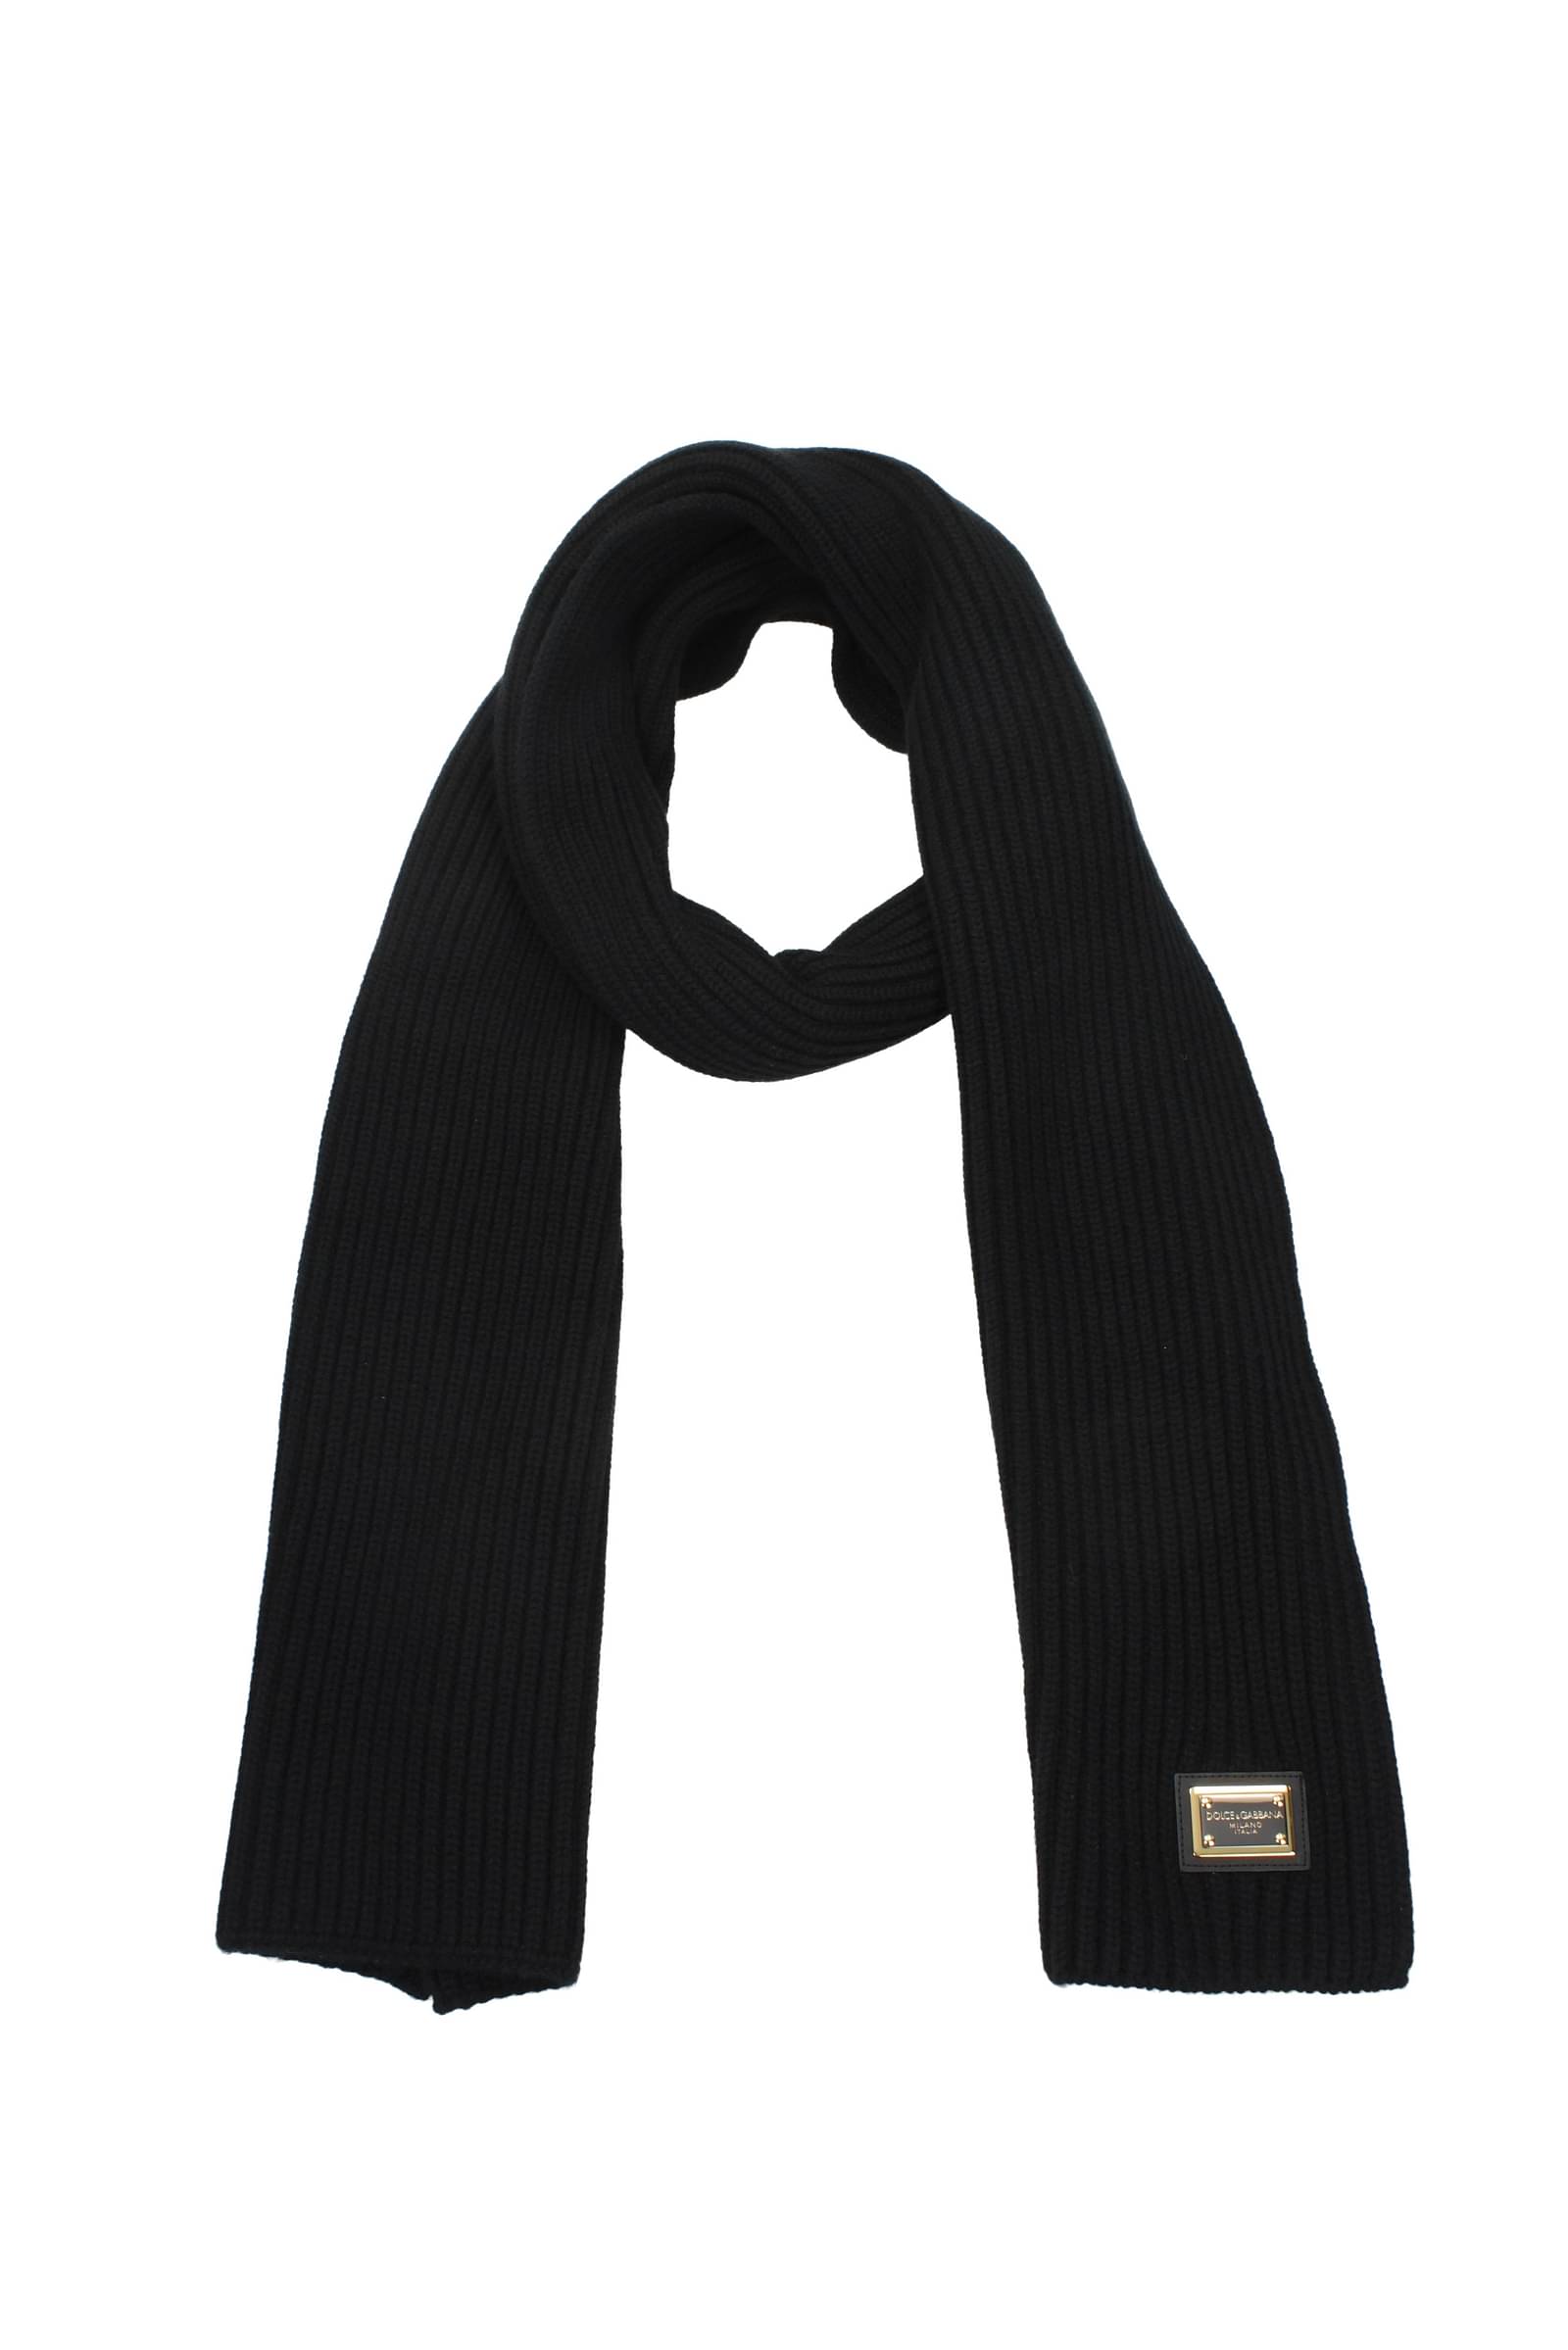 Givenchy Scarves Men BP007RP0H7467 Wool Blue Baltic 364€